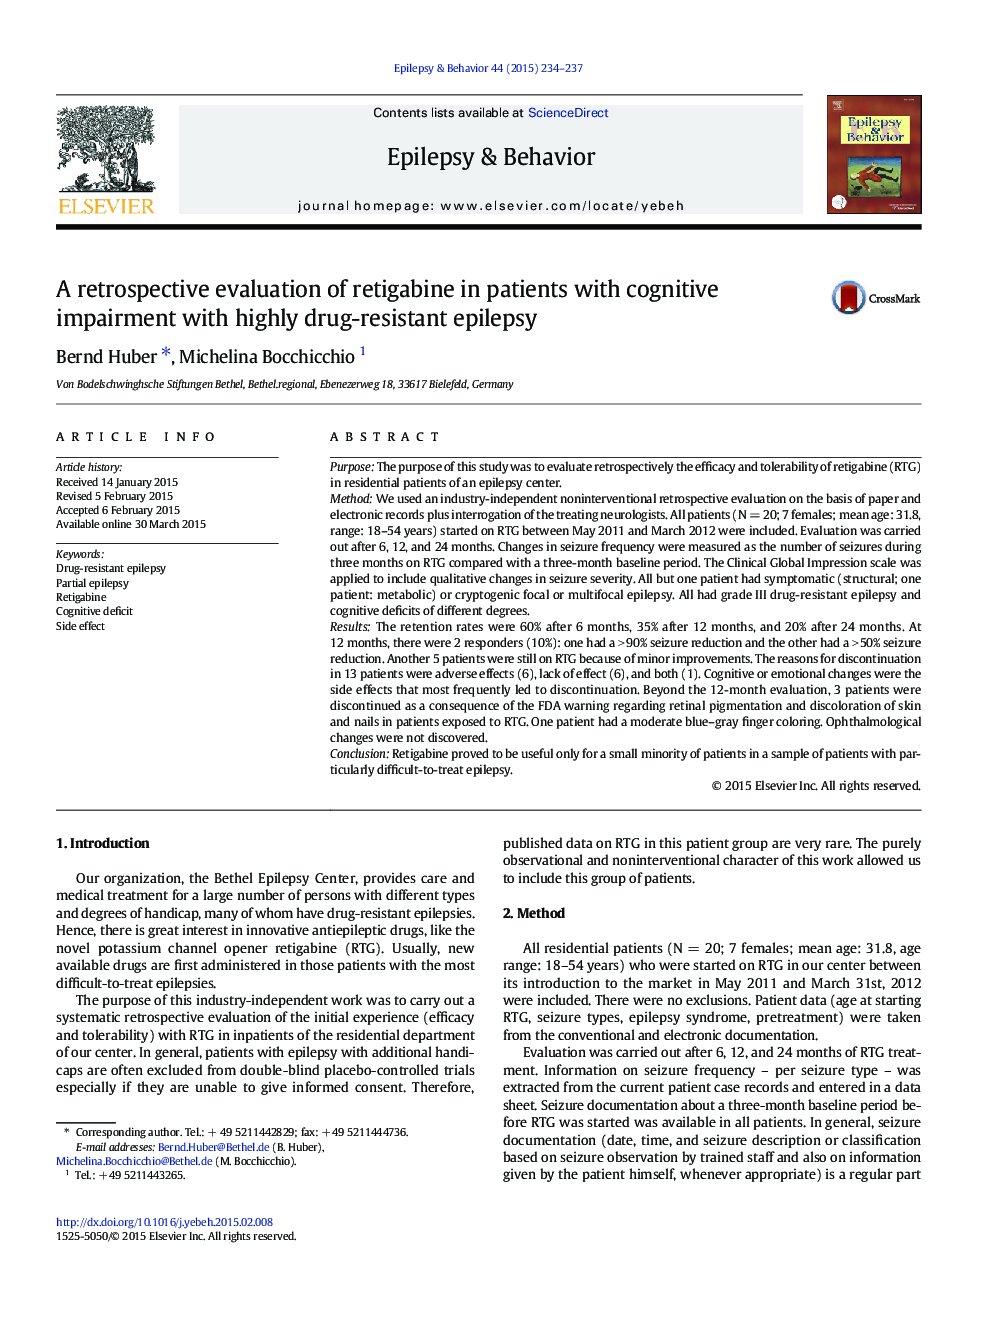 A retrospective evaluation of retigabine in patients with cognitive impairment with highly drug-resistant epilepsy